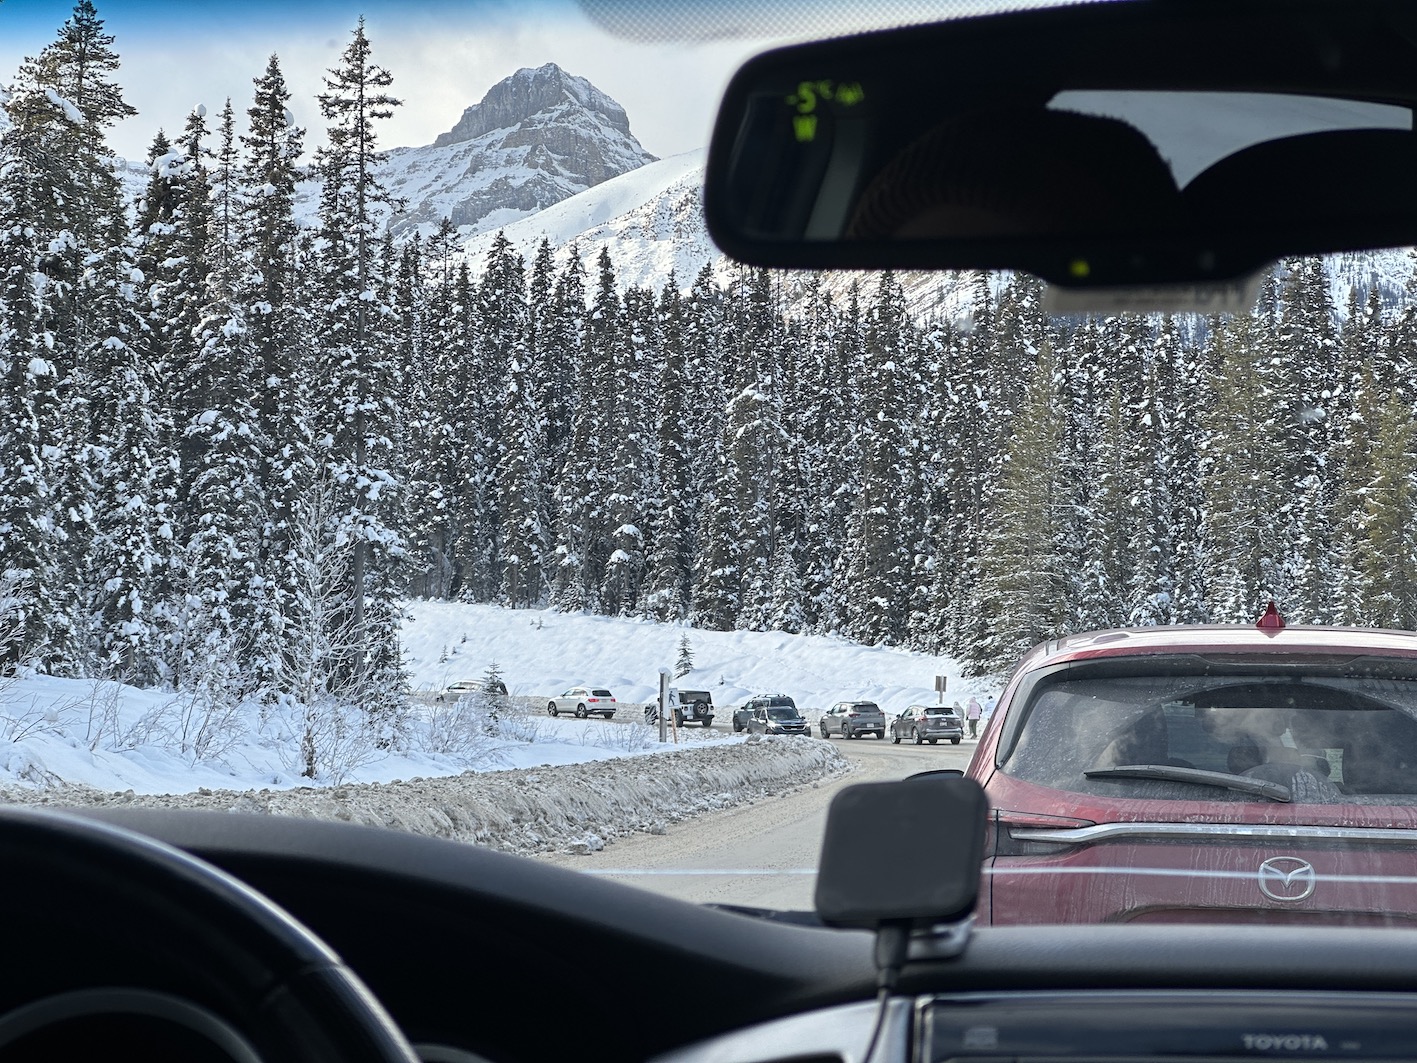 Driving to Lake Louise during the holidays - congestion on Christmas